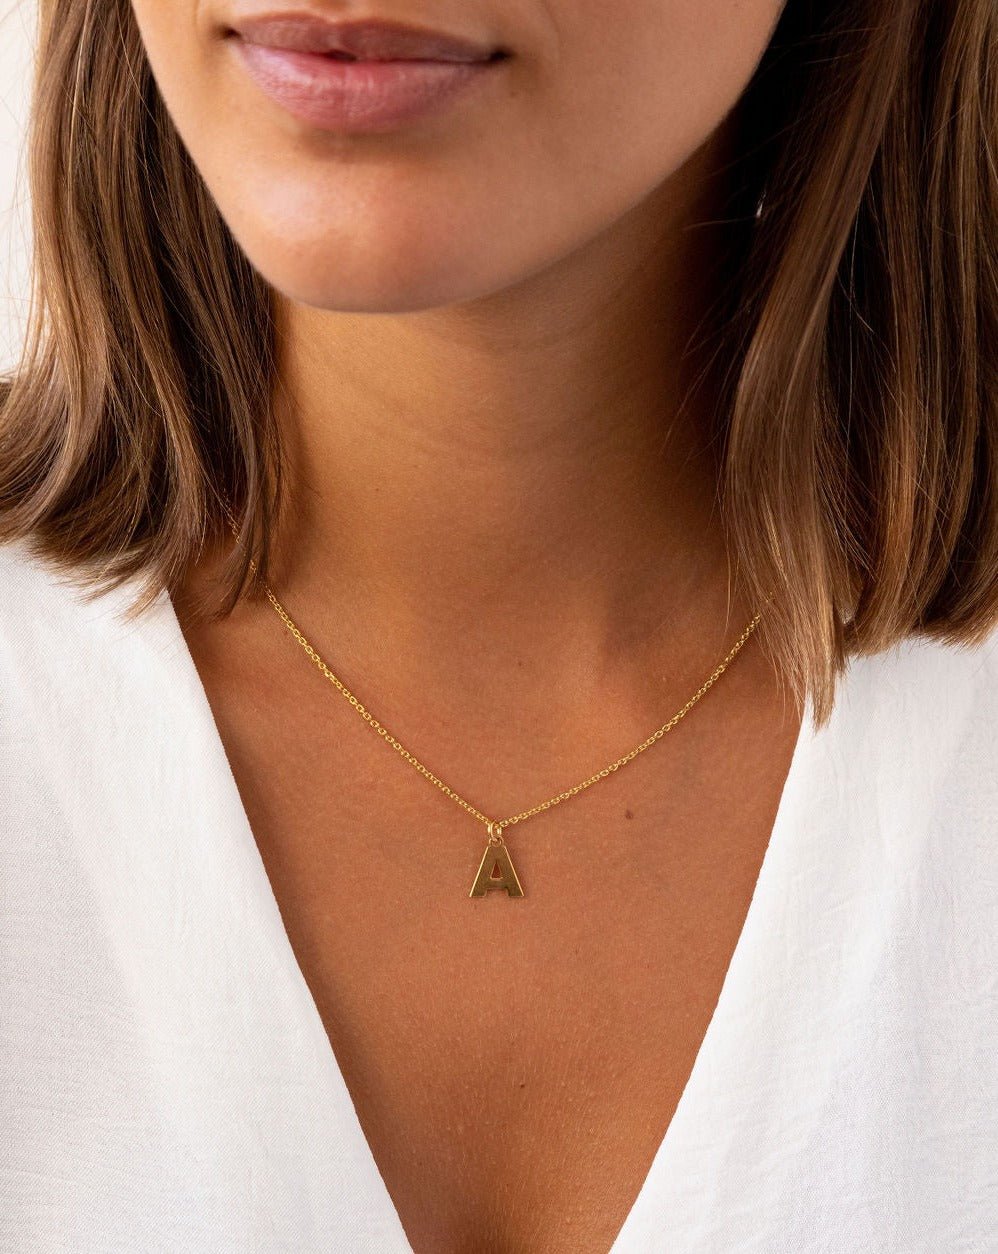 GOLD MIDI INITIAL NECKLACE